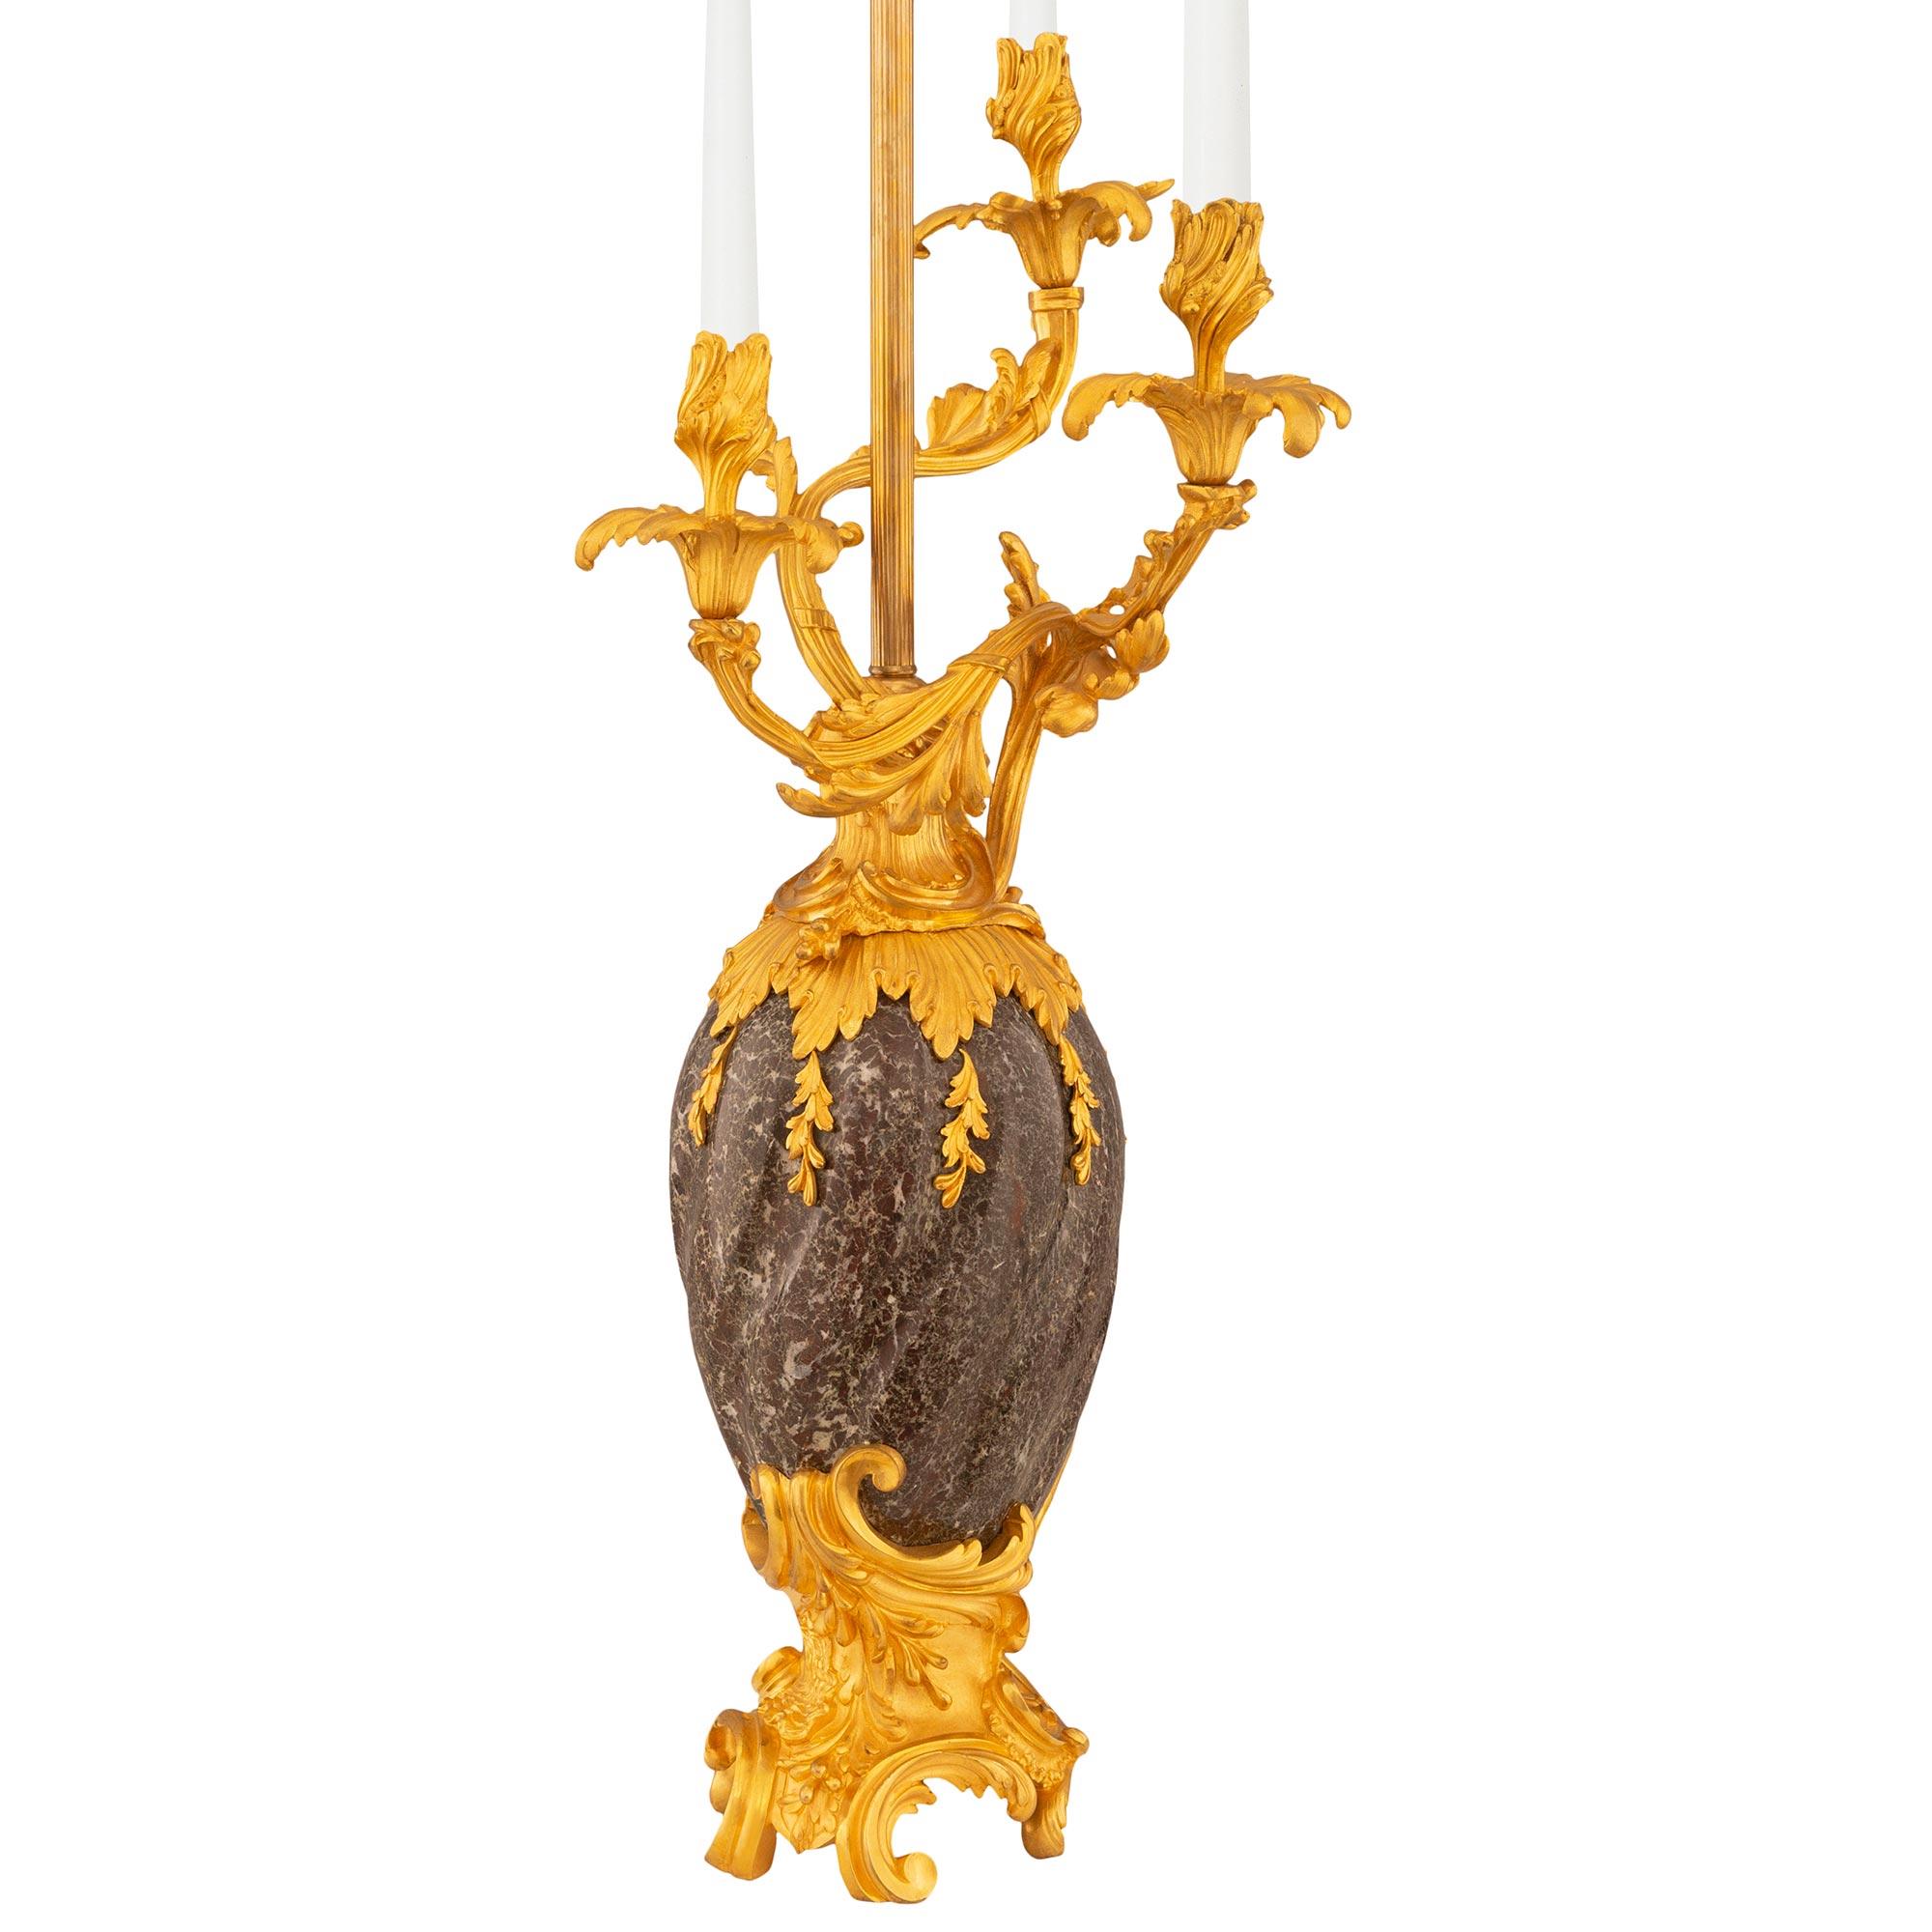 An impressive and palatial pair of French 19th century Louis XV st. Ormolu and Rosso Levanto marble candelabra lamps. Each stunning and high quality lamp is raised on an Ormolu Rocaille designed base with scrolled movements and block feet supporting